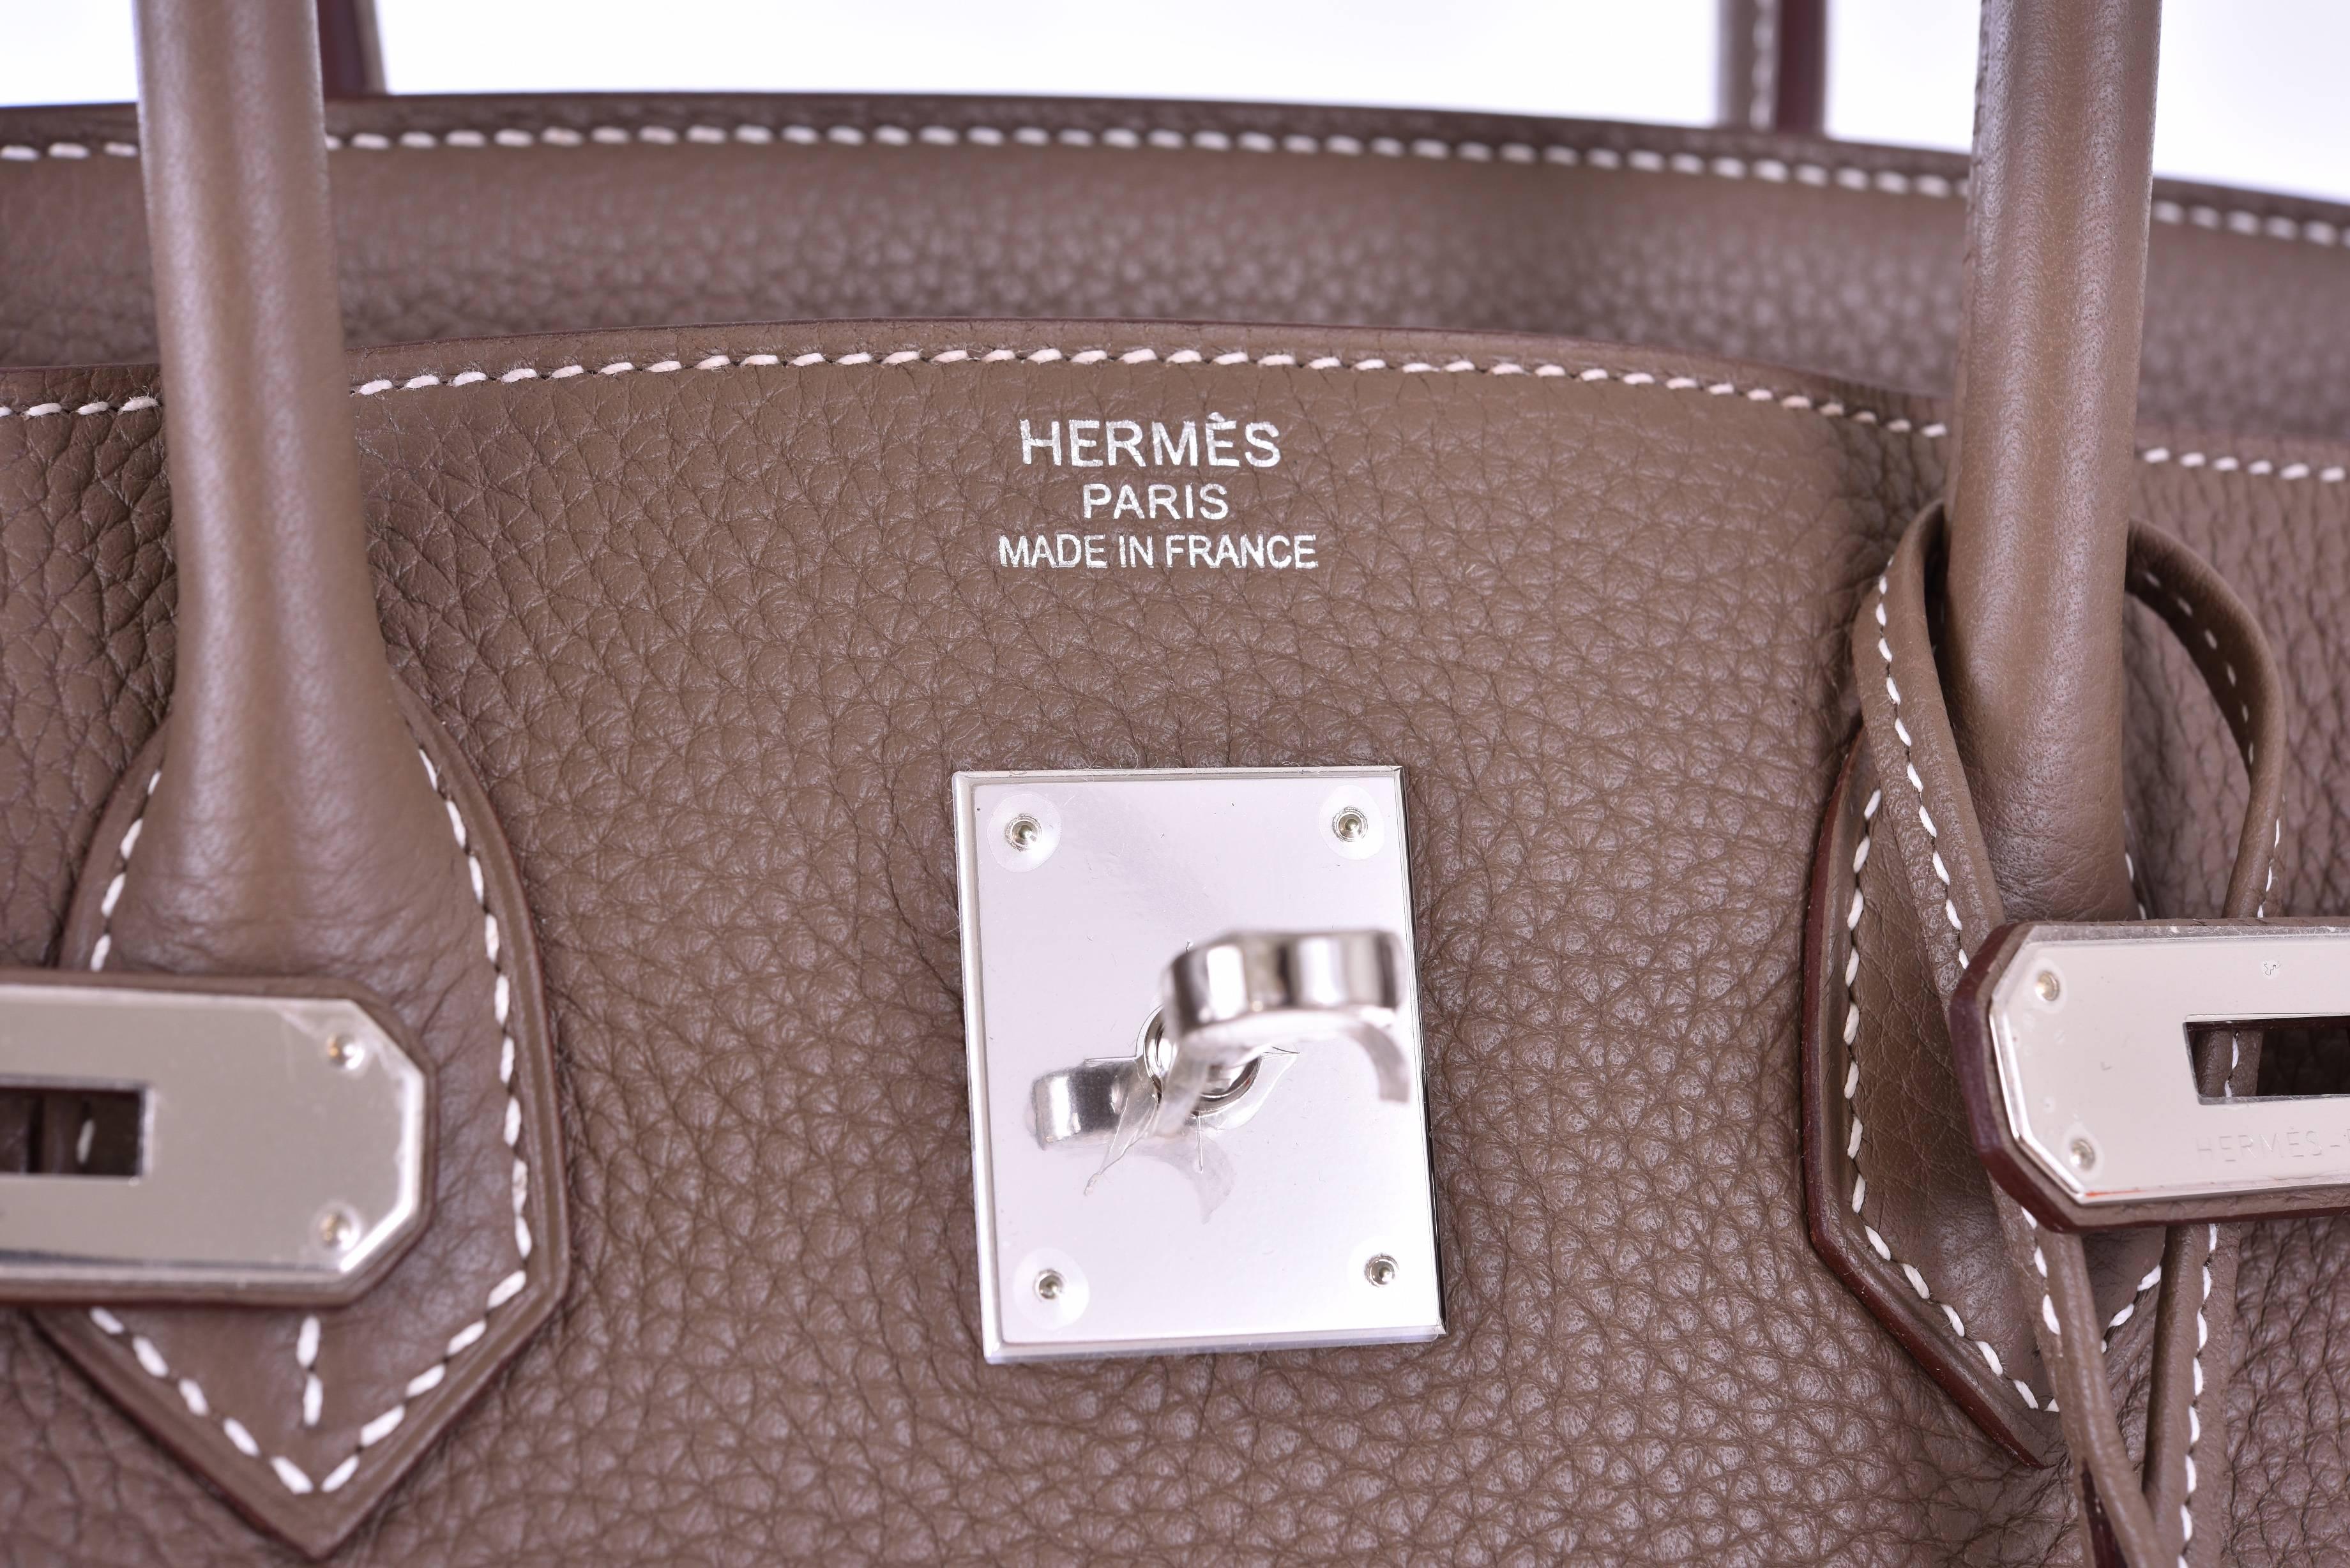 Hermes Birkin Bag 35cm Etoupe Togo with palladium Hardware

New Condition

This Hermes Etoupe Birkin 35cm in Clemence leather with palladium hardware.

This Birkin features white contrast stitching, front toggle closure, clochette with lock